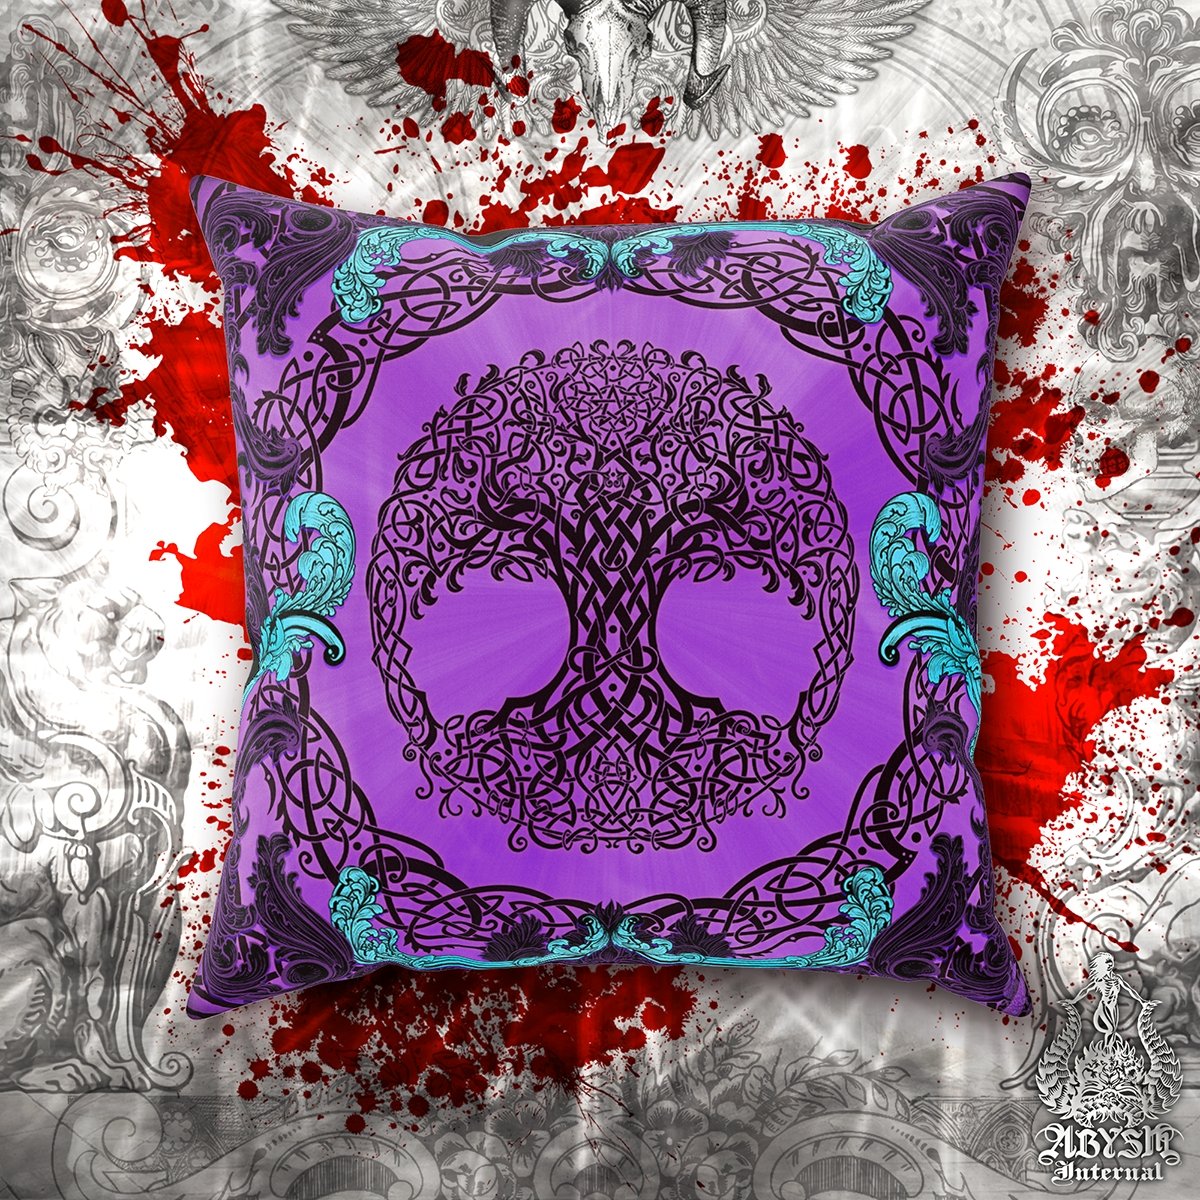 Witchy Throw Pillow, Decorative Accent Cushion, Tree of Life, Pagan Room Decor, Celtic Art, Alternative Home - Pastel Goth, Purple - Abysm Internal